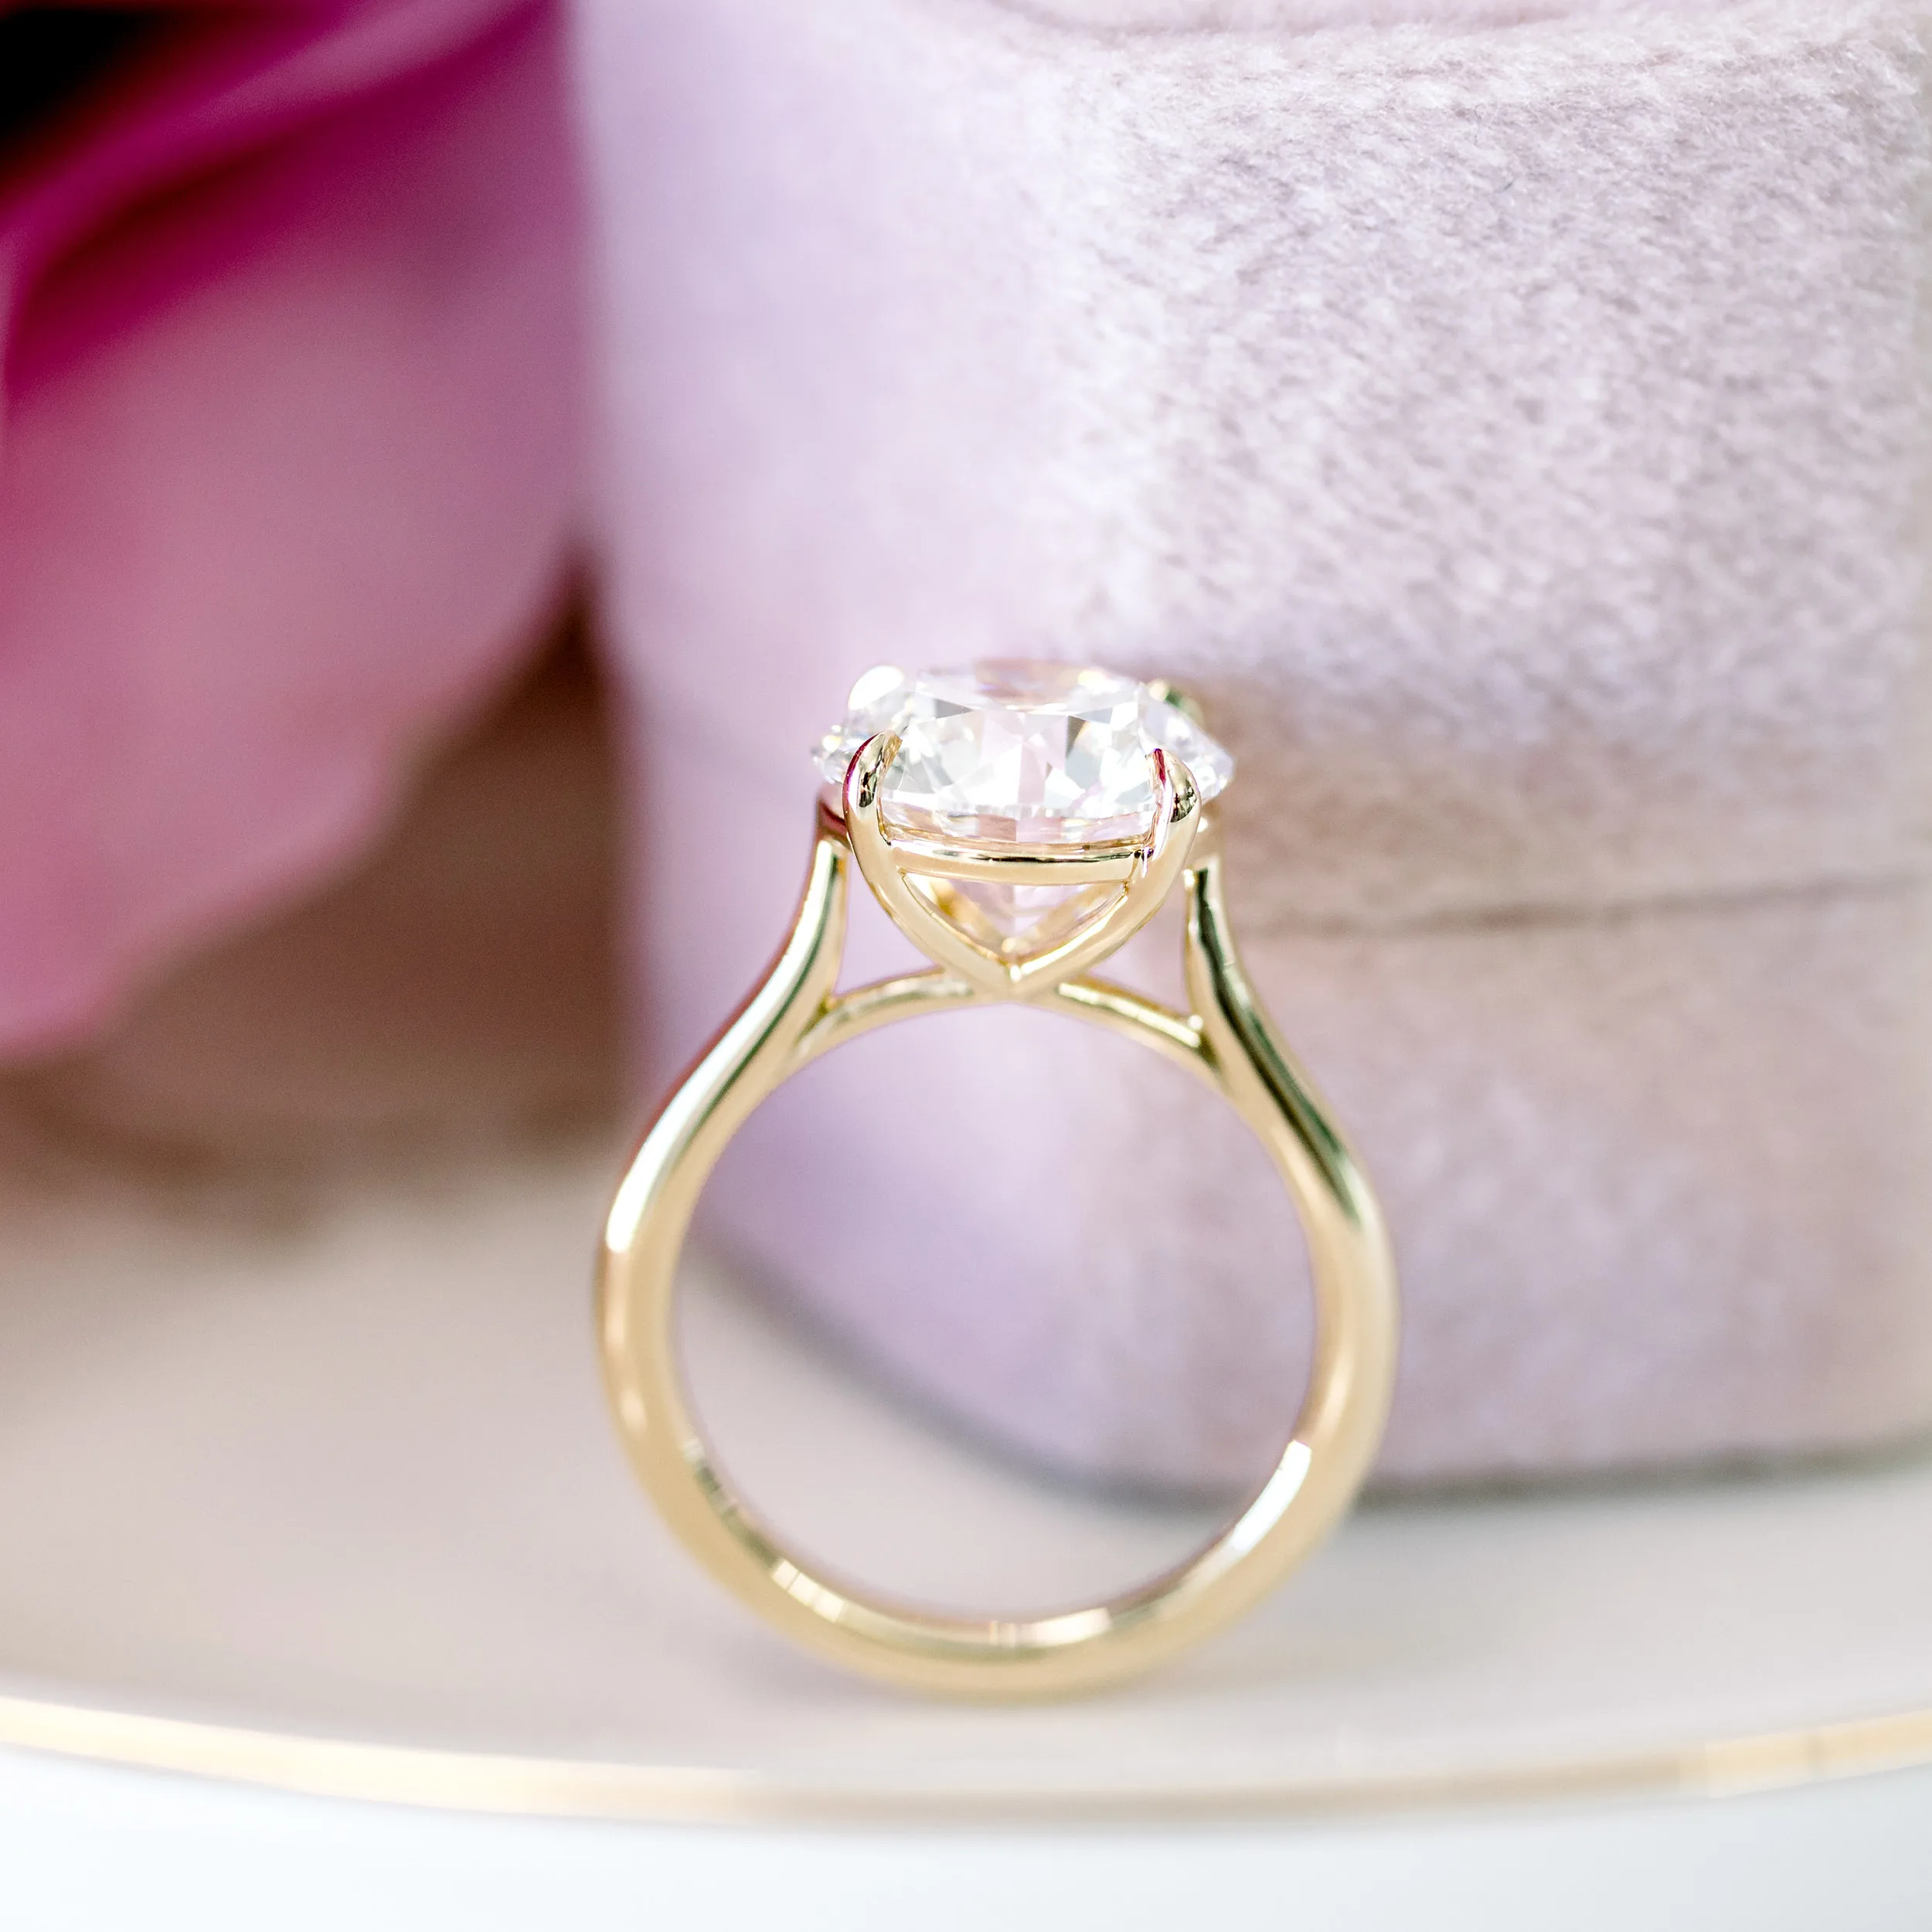 Yellow Gold Round Trellis Solitaire Diamond Engagement Ring featuring 3.5 Carat Lab Grown Diamonds (Profile View)